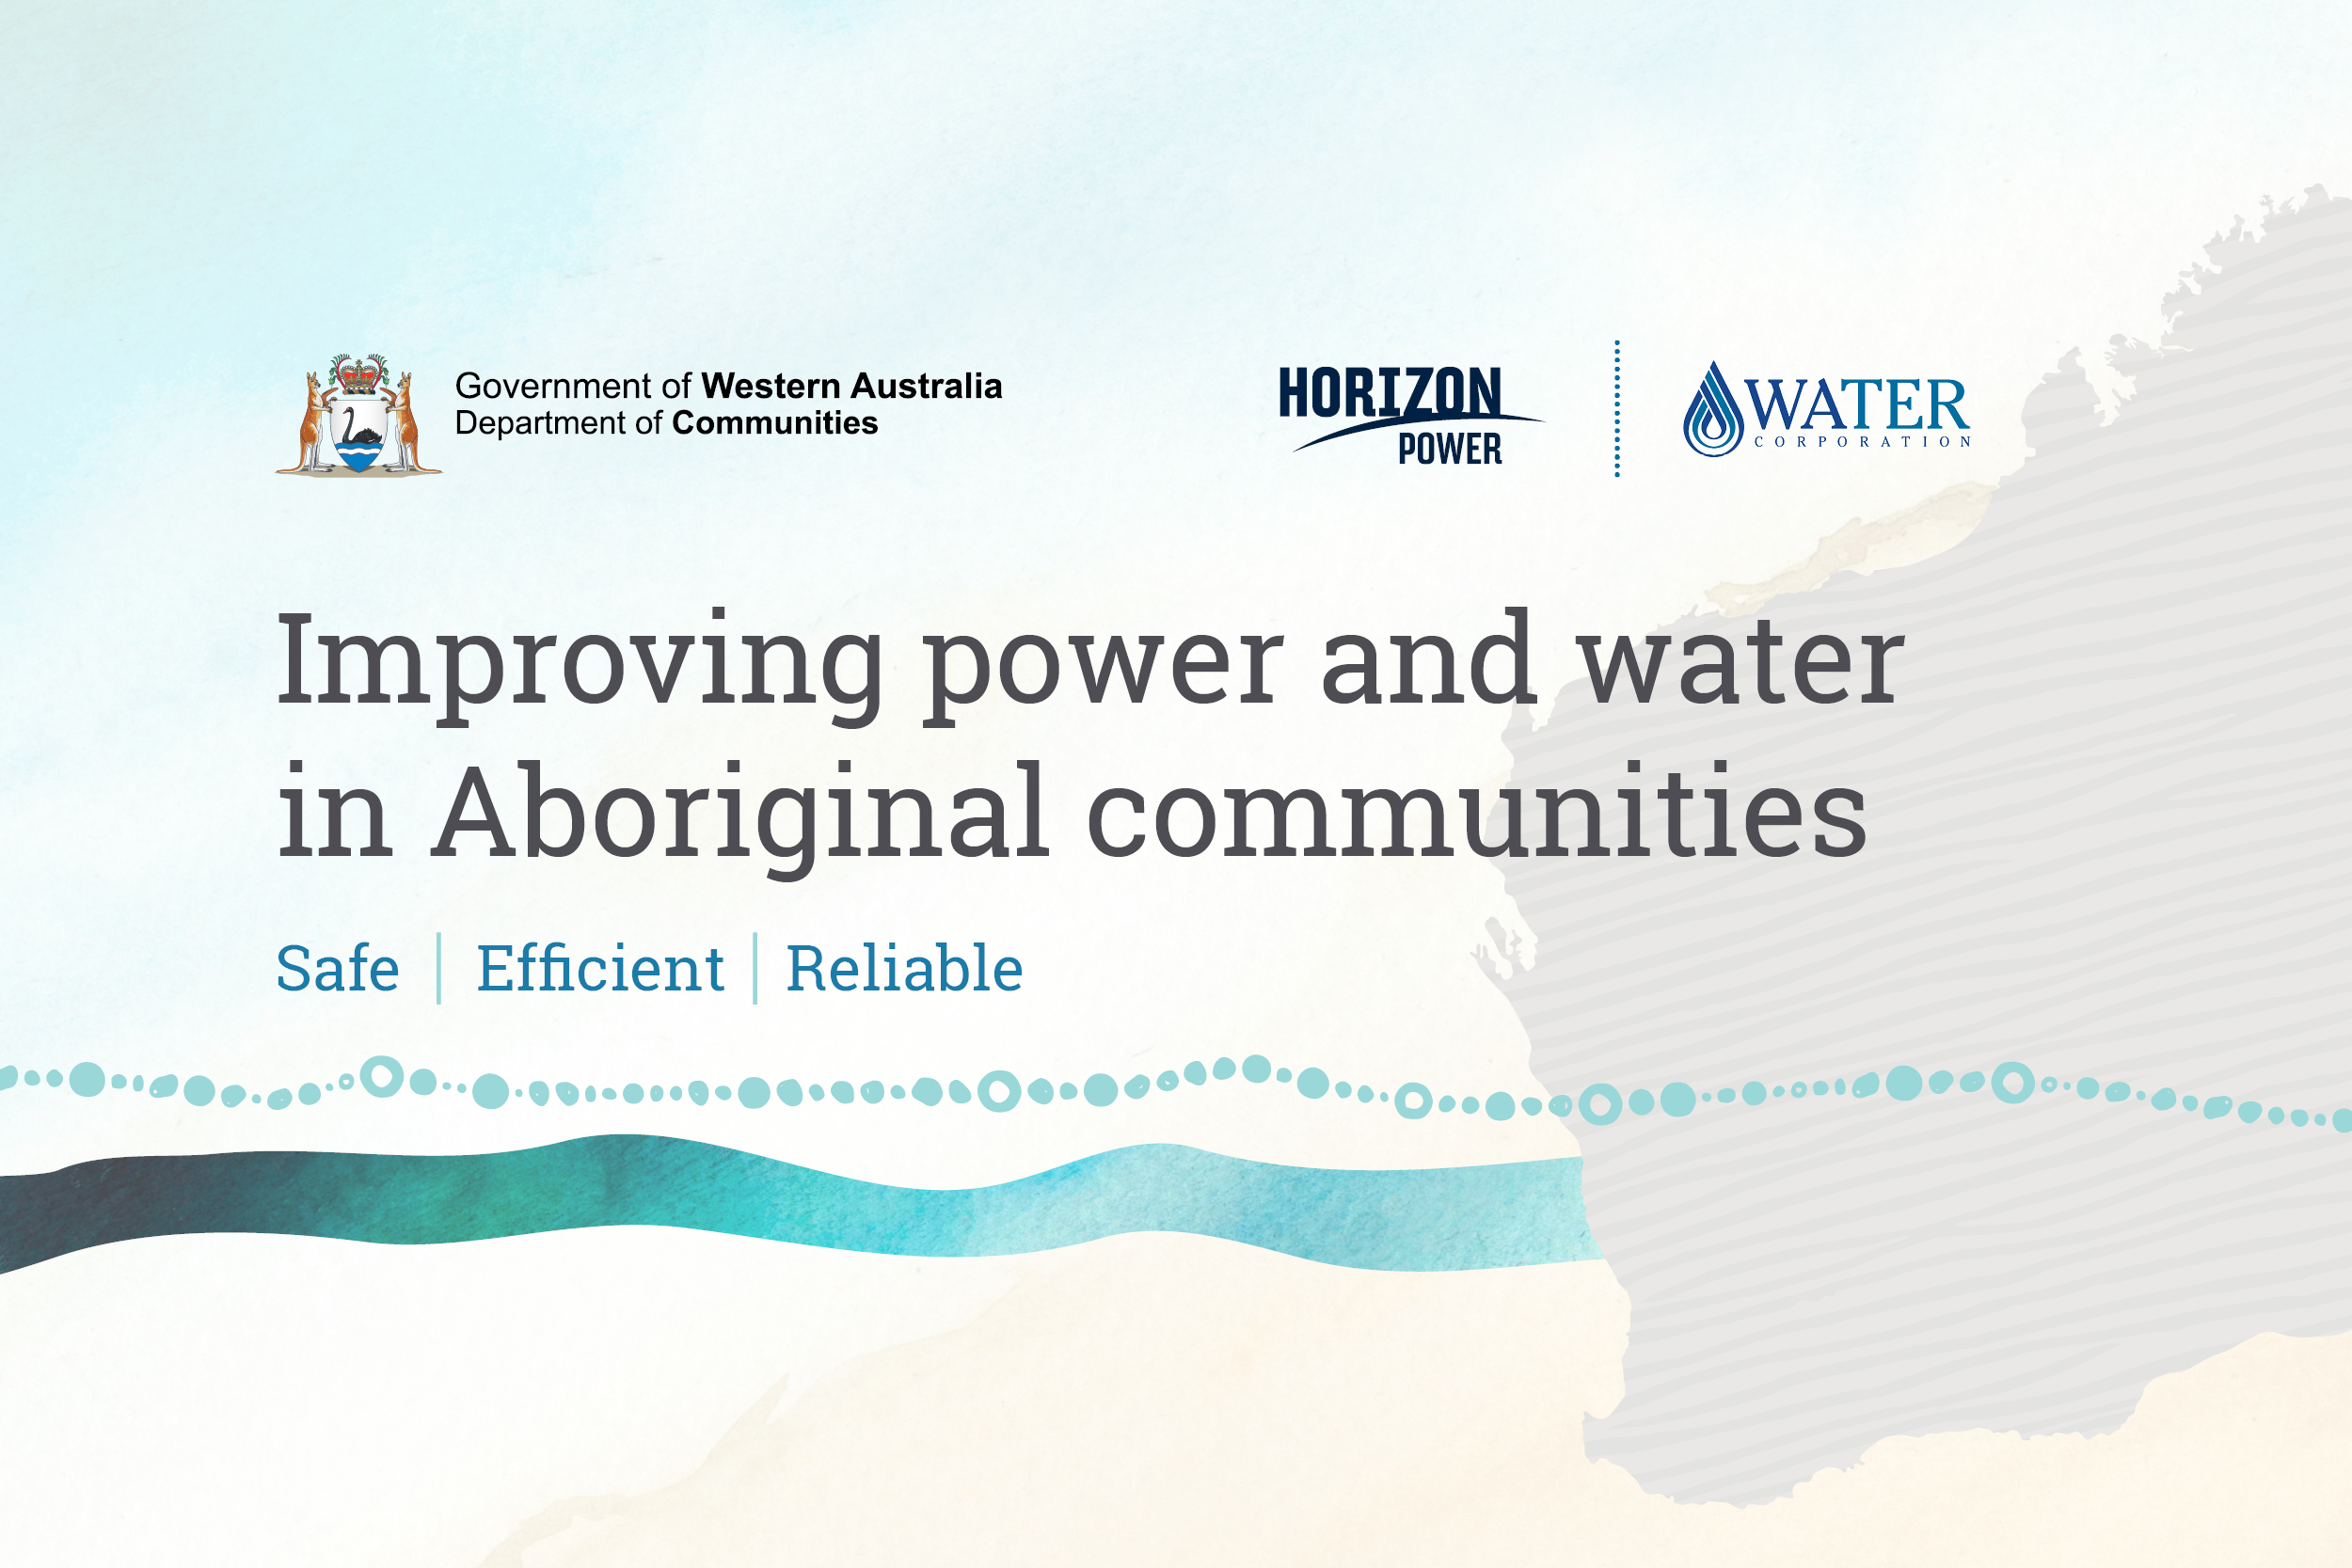 Improving power and water in Aboriginal communities with the logos of Dept of Communities, Horizon Power and Water Corp